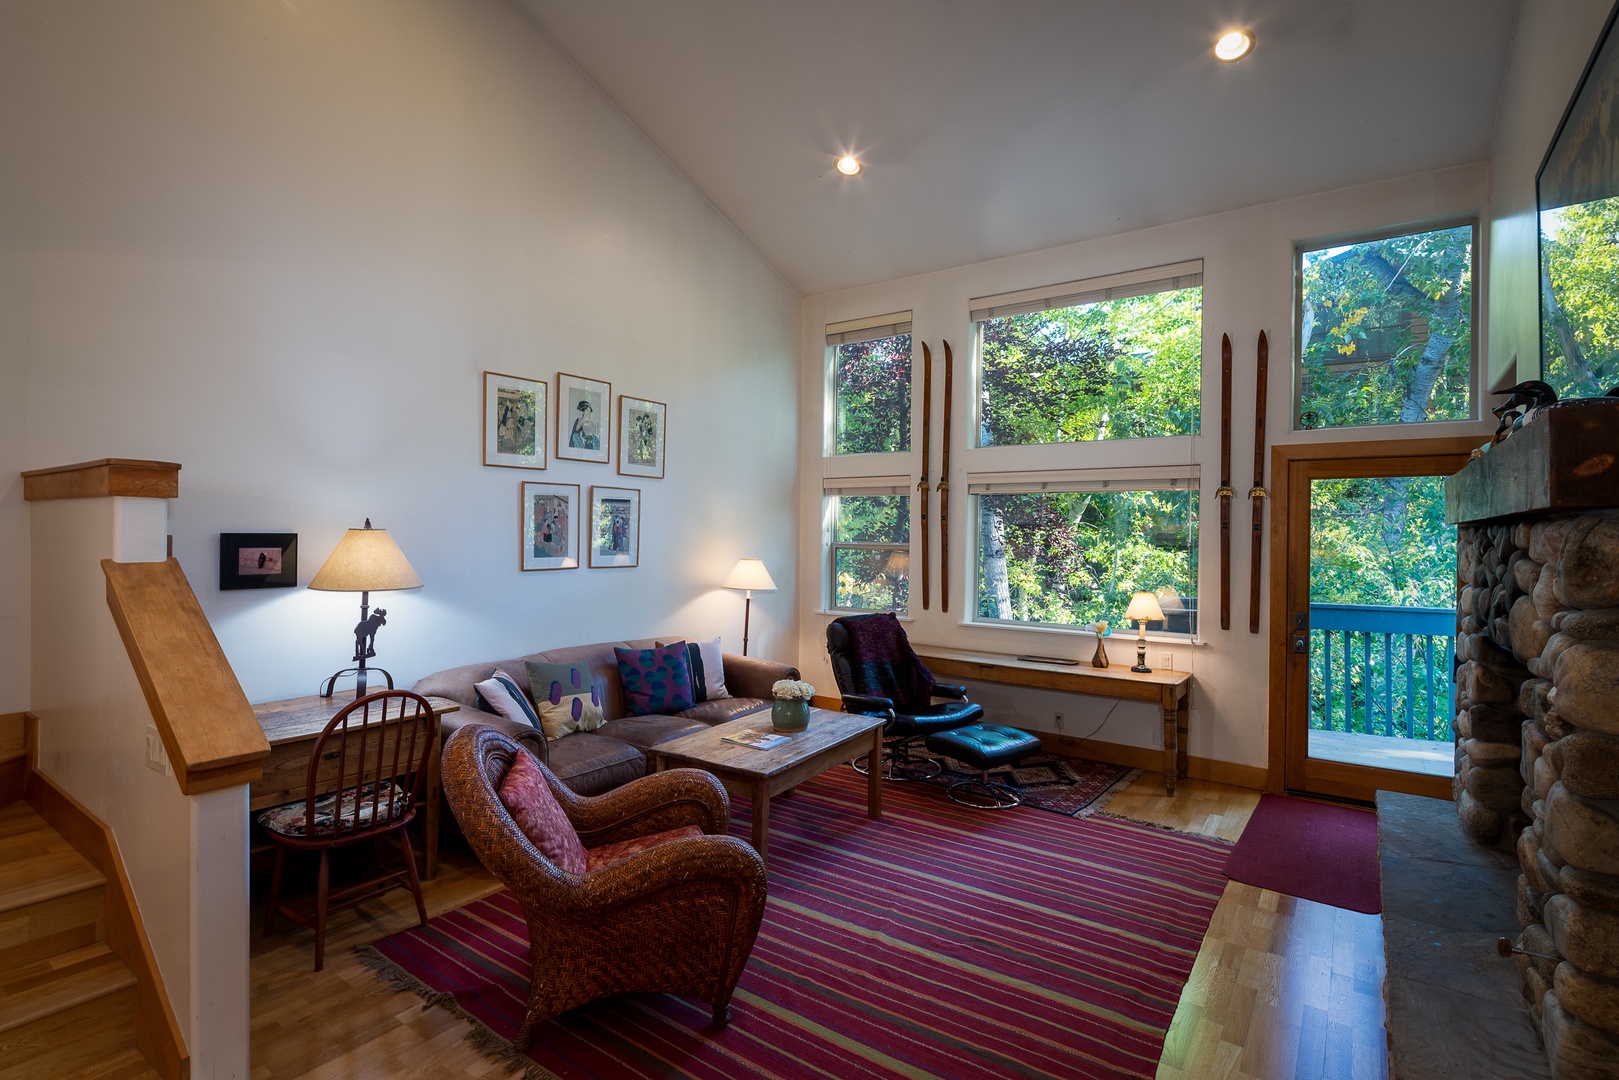 Ketchum Vacation Rentals, Bridgepoint Charm - Enjoy beautiful views of nature from the comfort of your living room or venture out to your private deck